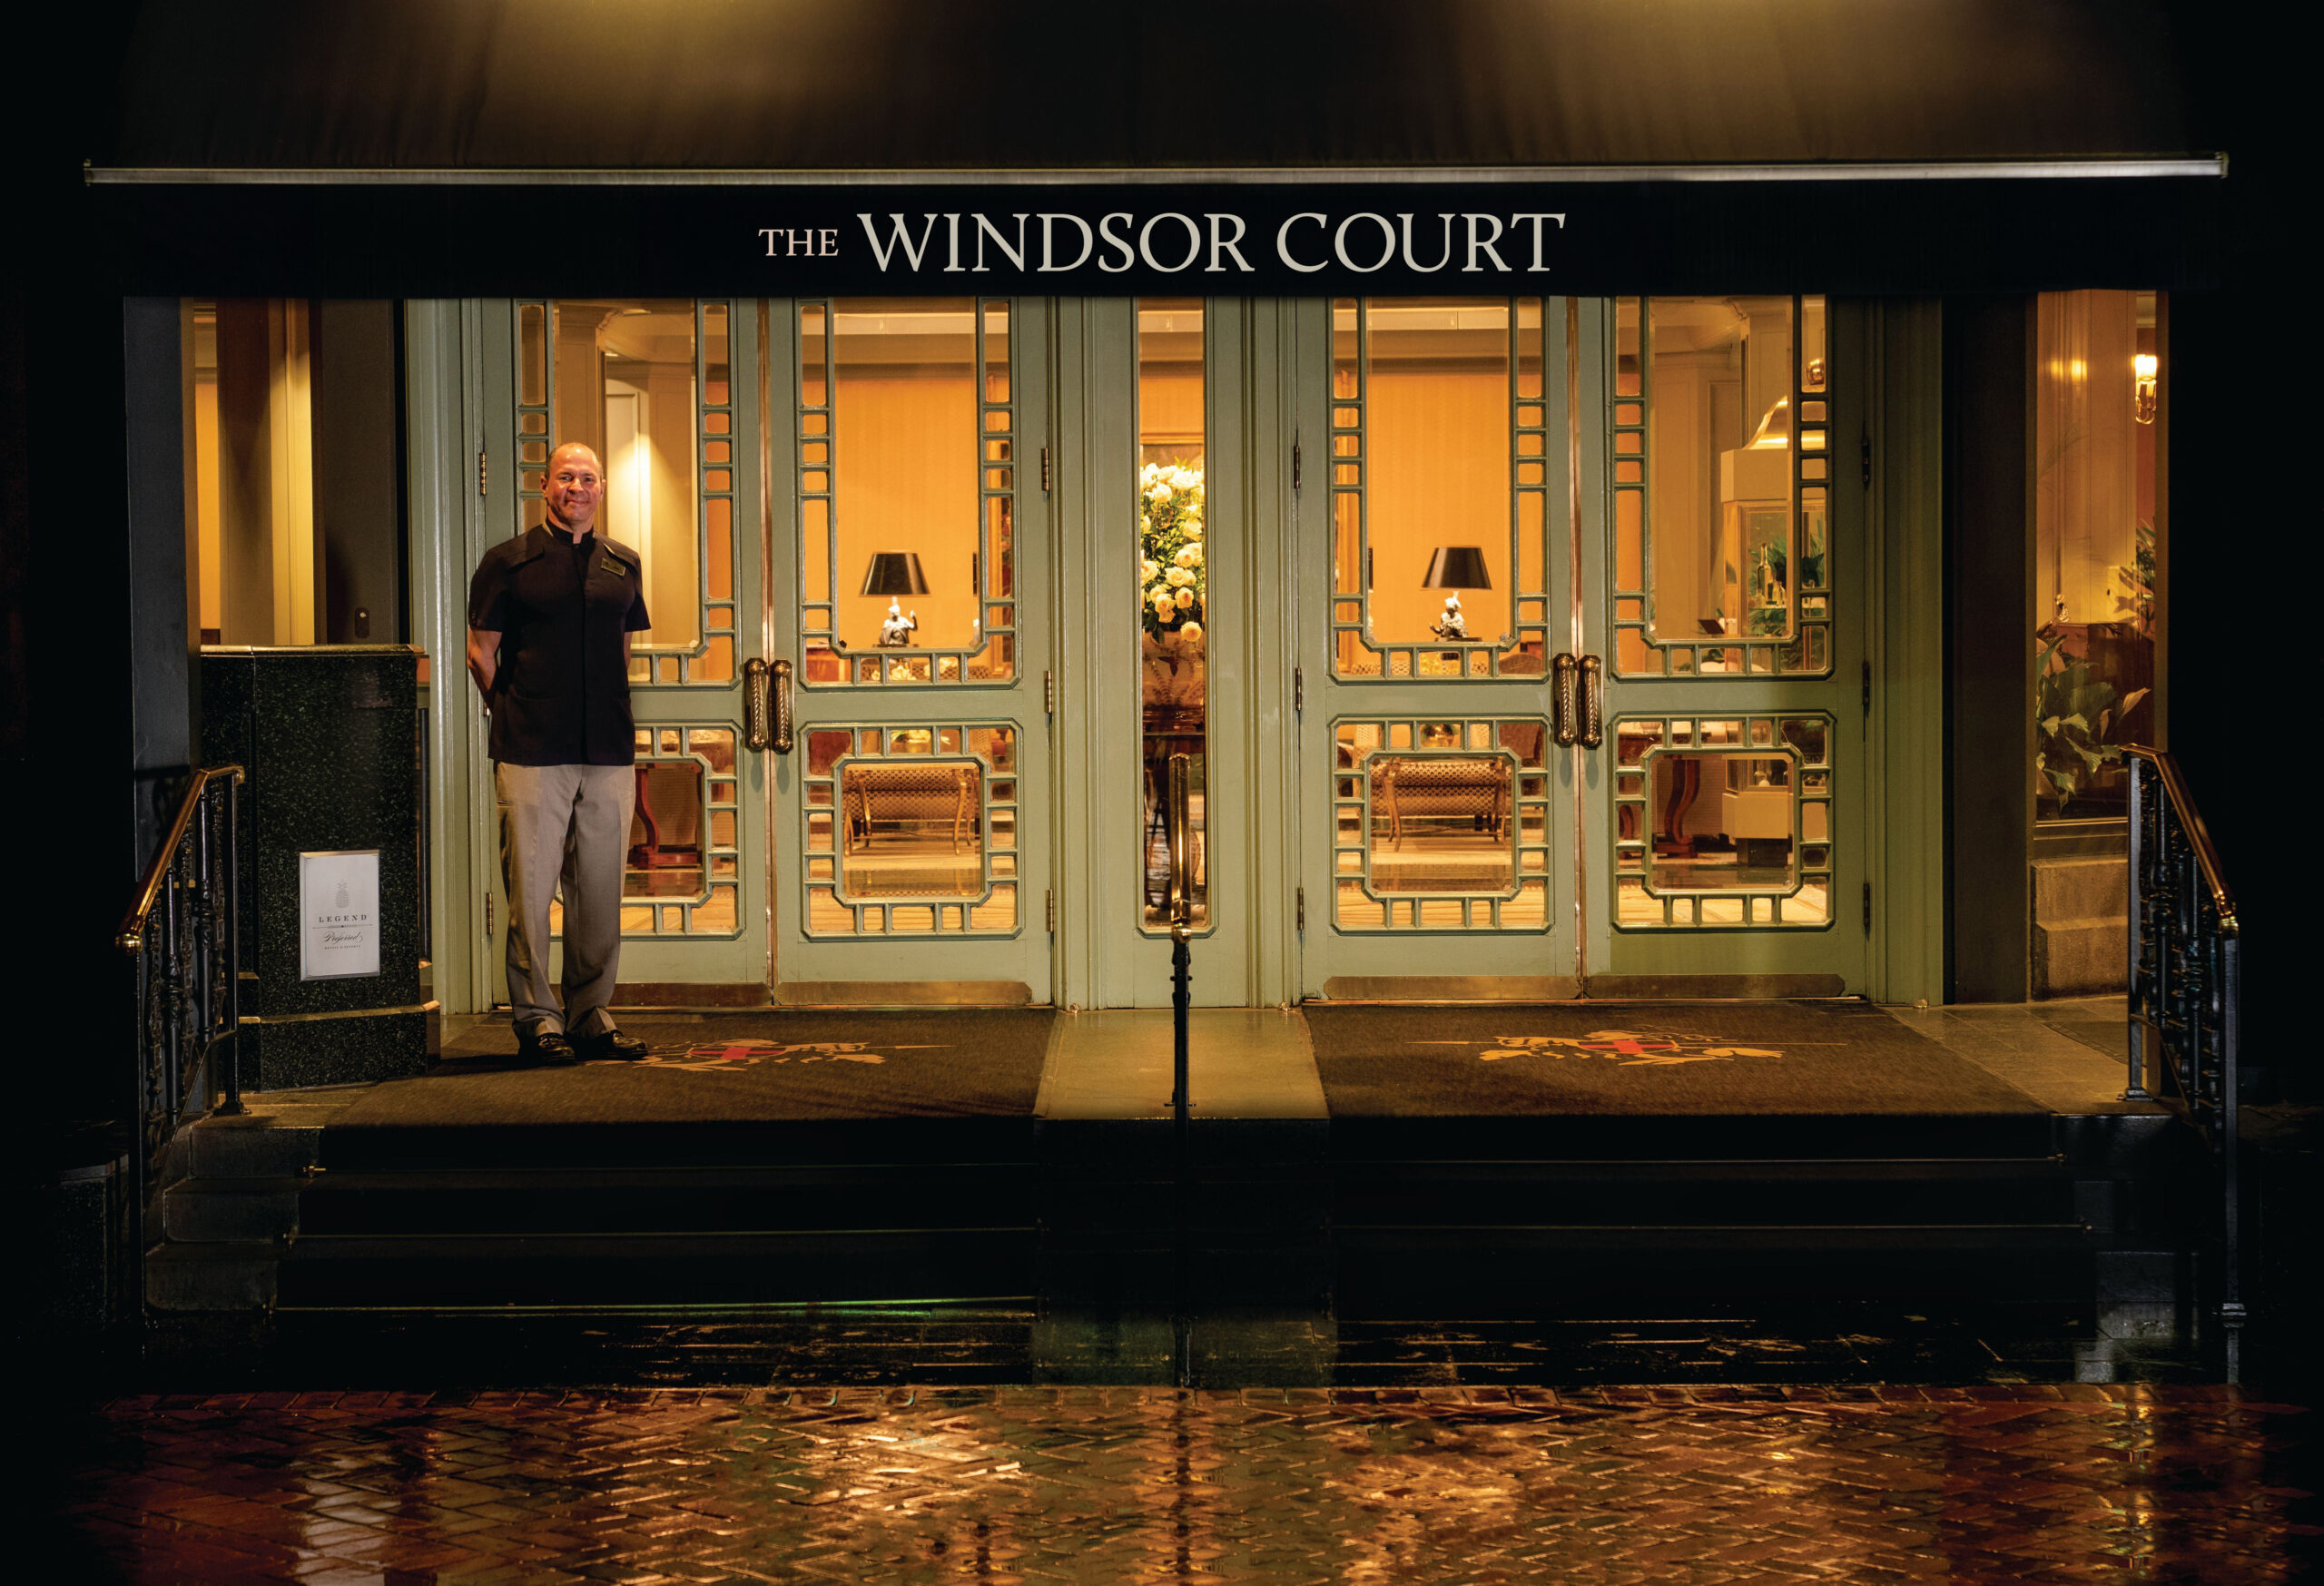 We go the extra mile for your convenience. - The Windsor Court